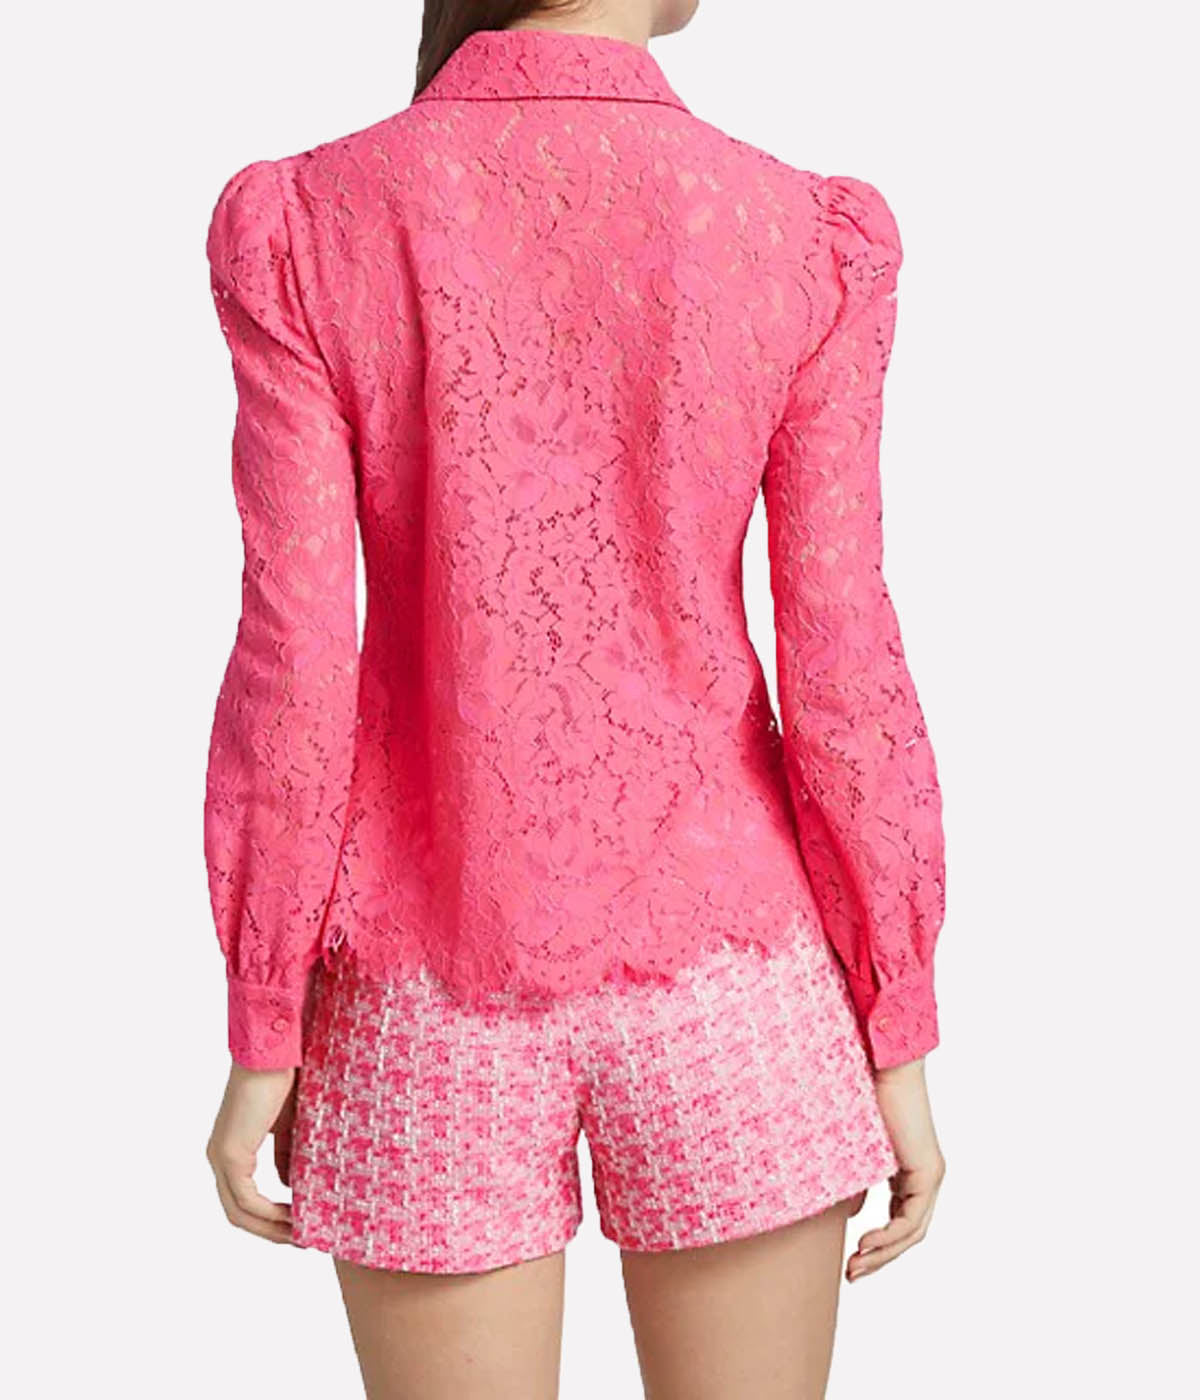 Jenica Lace Shirt in Rose